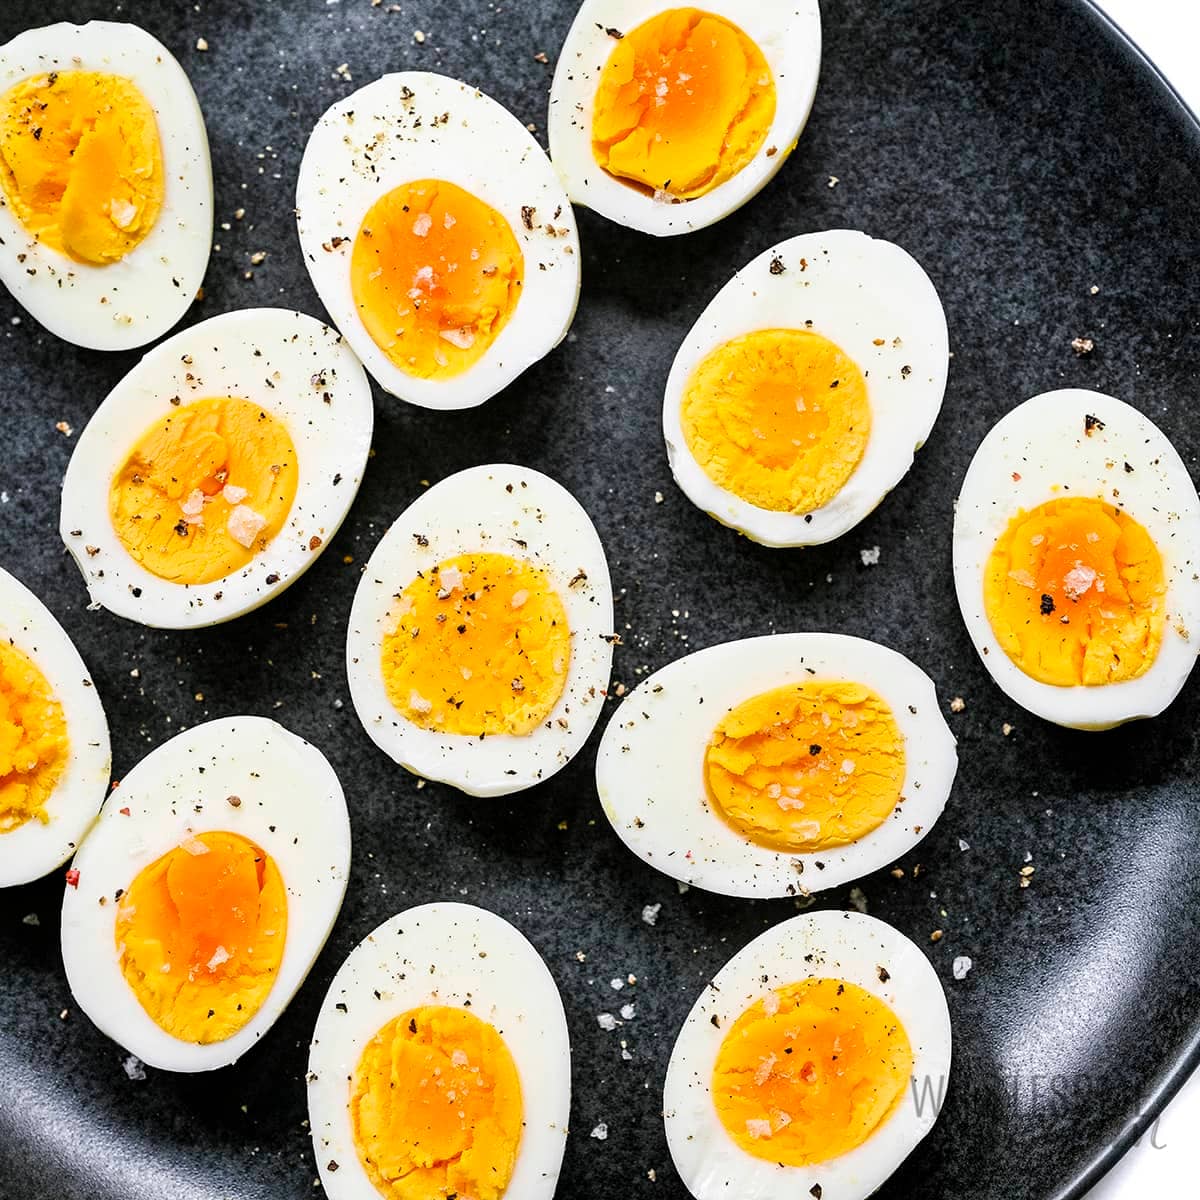 Air fryer hard boiled eggs on a plate.